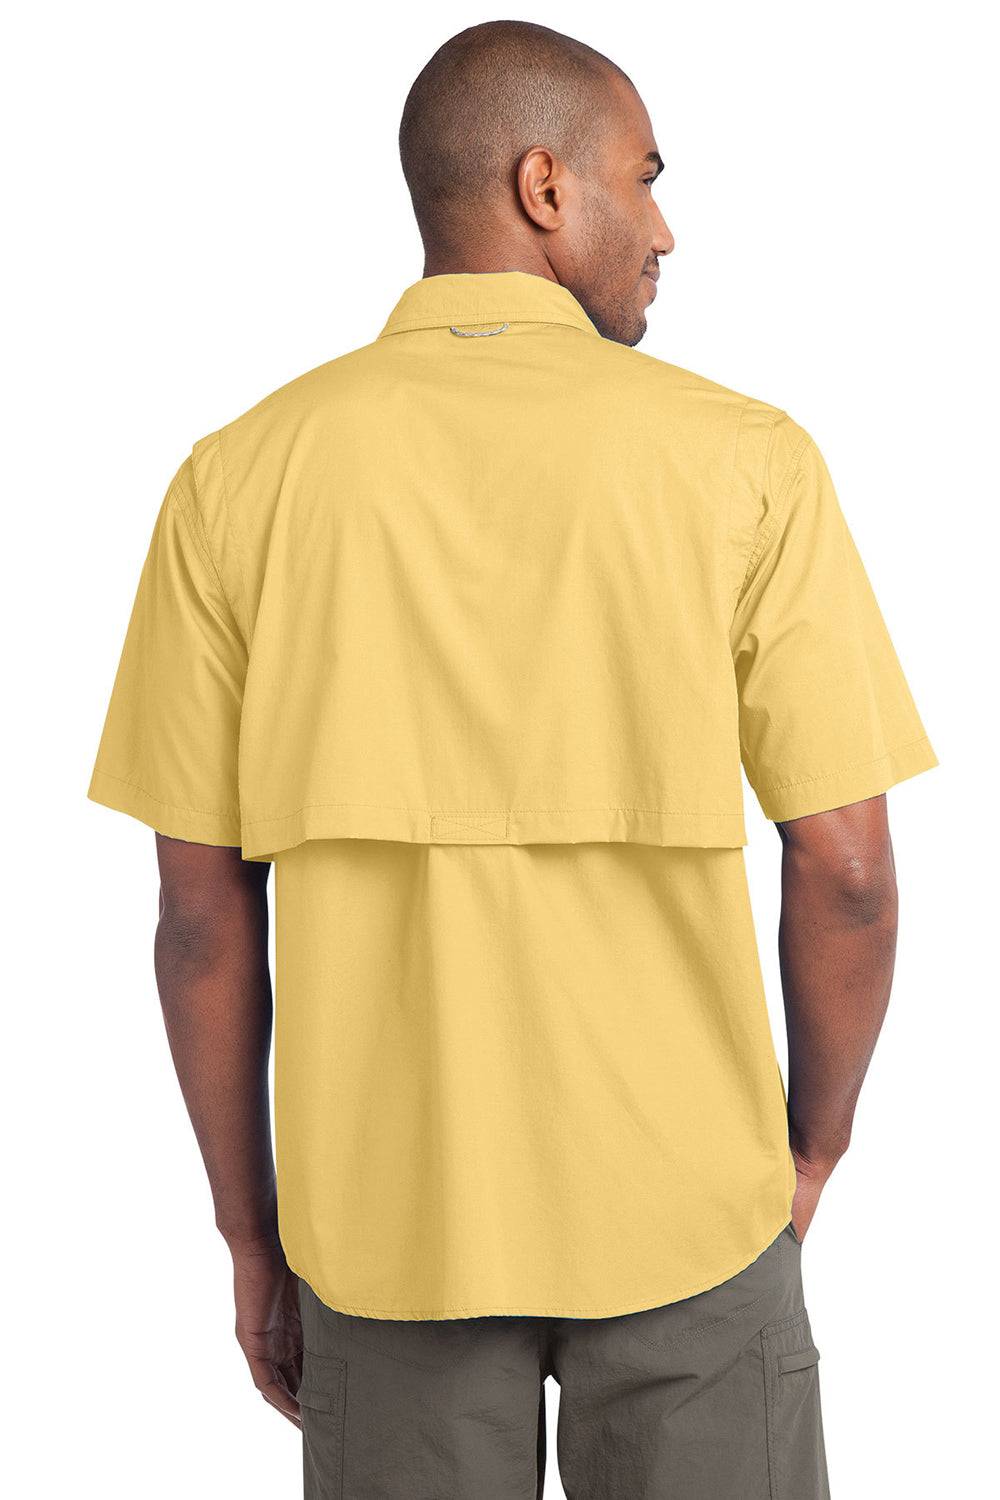 Eddie Bauer Mens Fishing Short Sleeve Button Down Shirt w/ Double Pockets -  Goldenrod Yellow (DISCONTINUED)